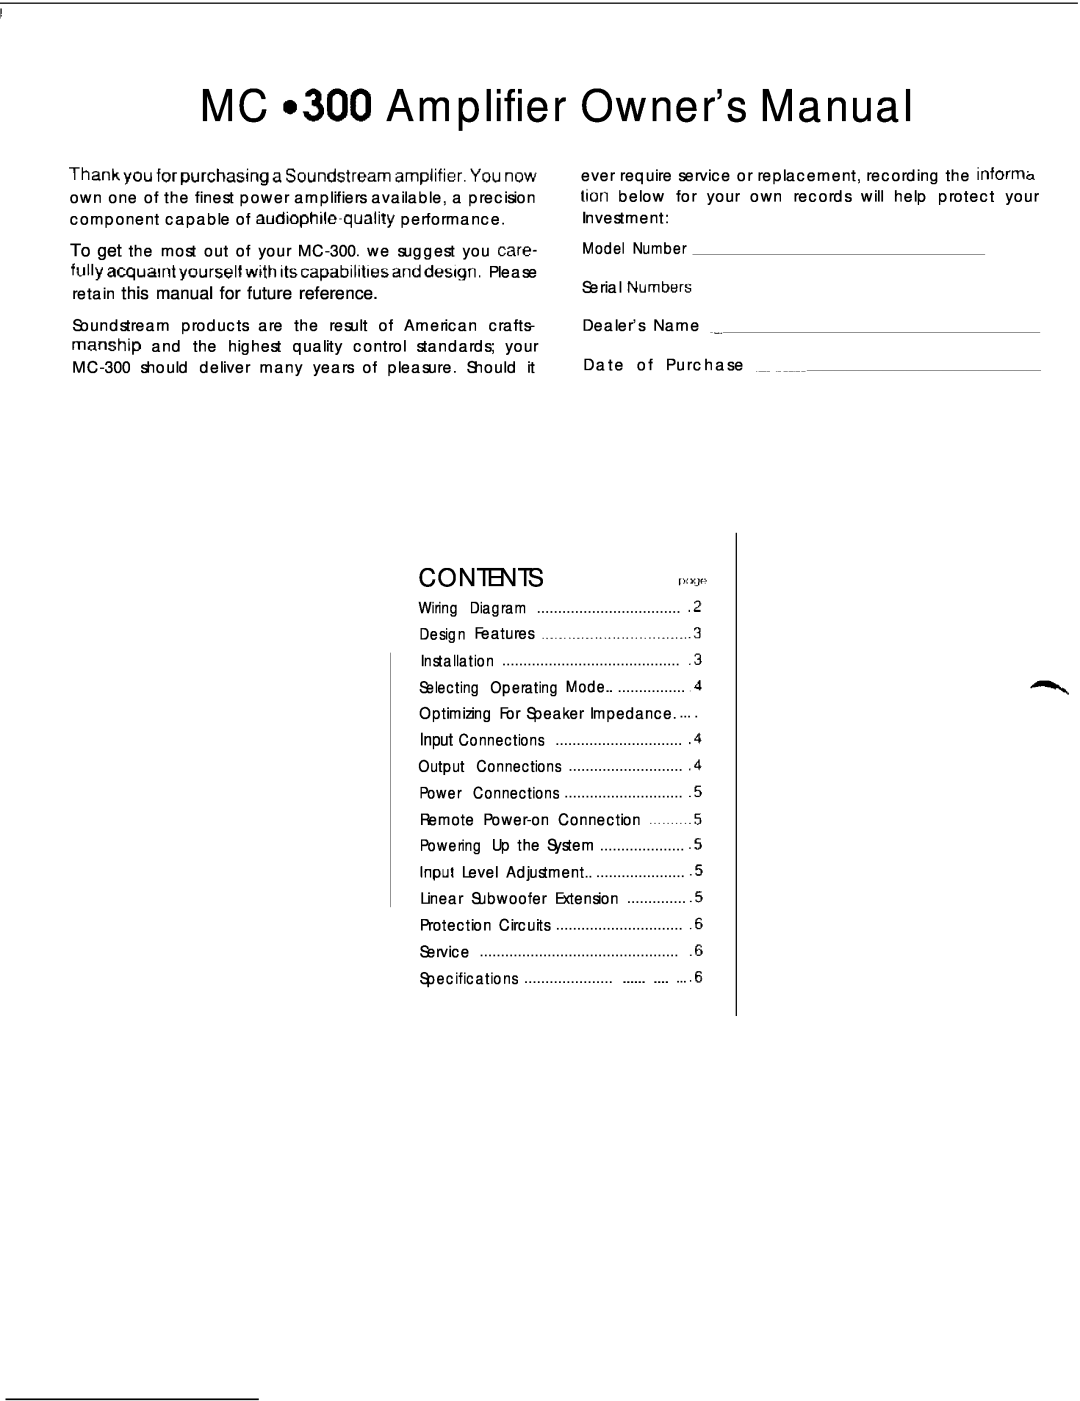 Soundstream Technologies MC-300 owner manual Contents 